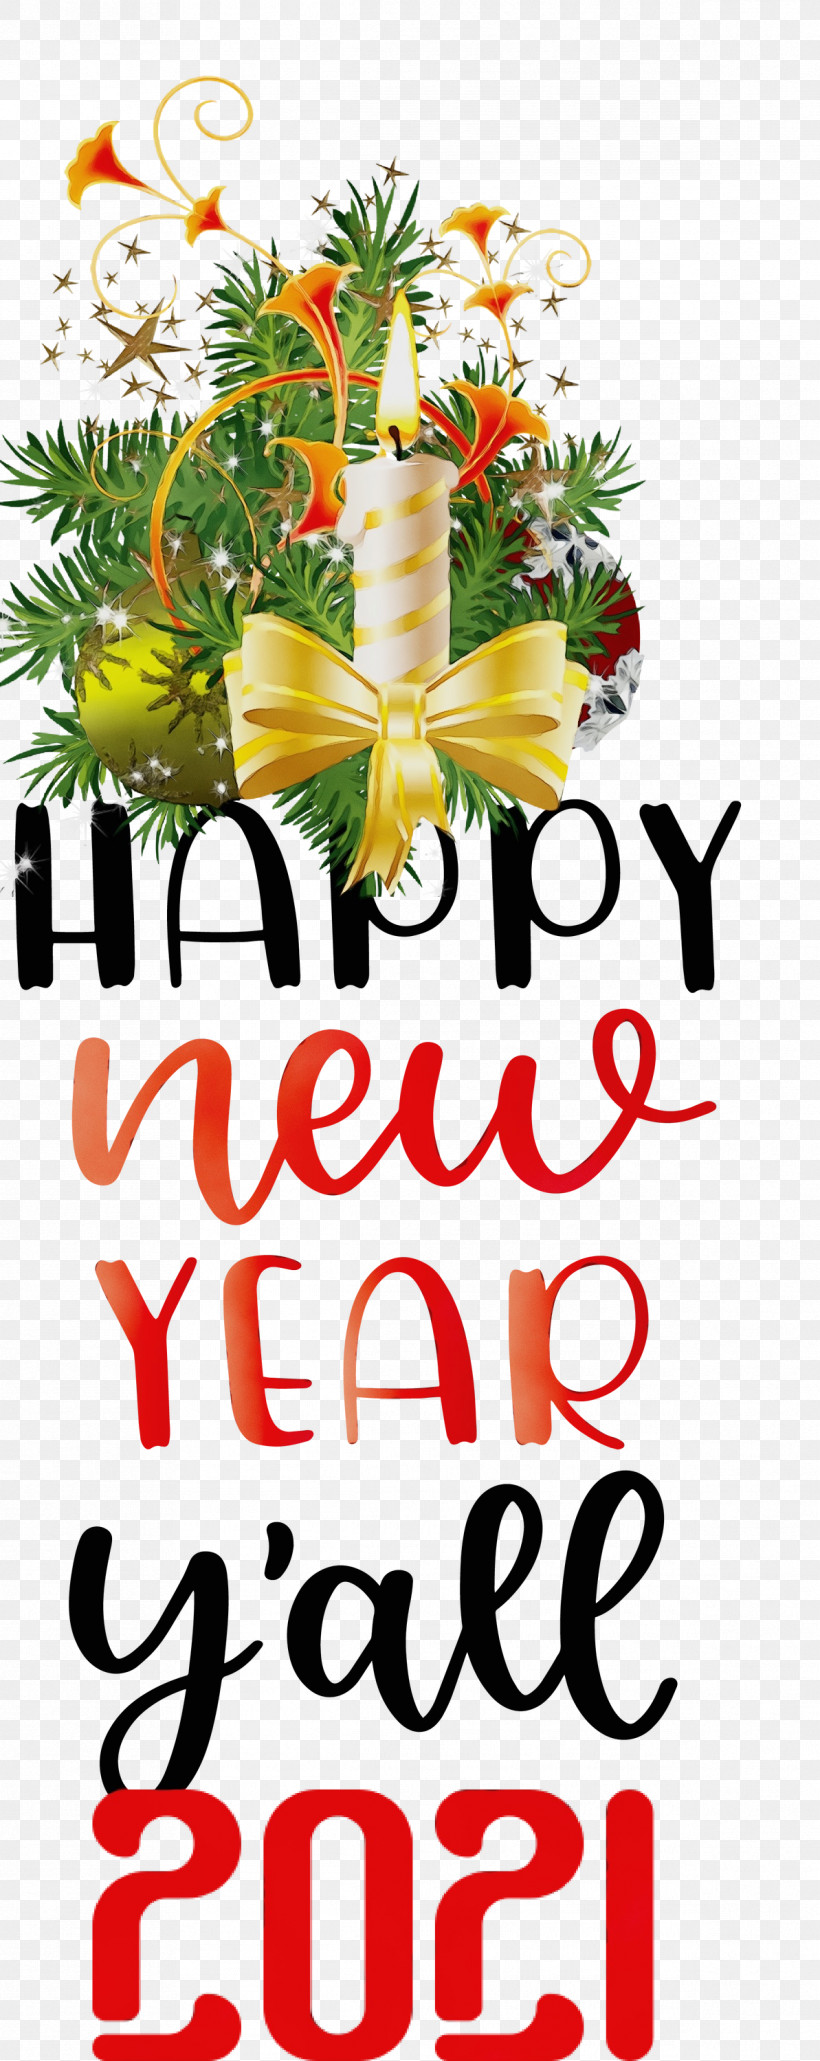 Floral Design, PNG, 1193x2999px, 2021 Happy New Year, 2021 New Year, 2021 Wishes, Cut Flowers, Floral Design Download Free